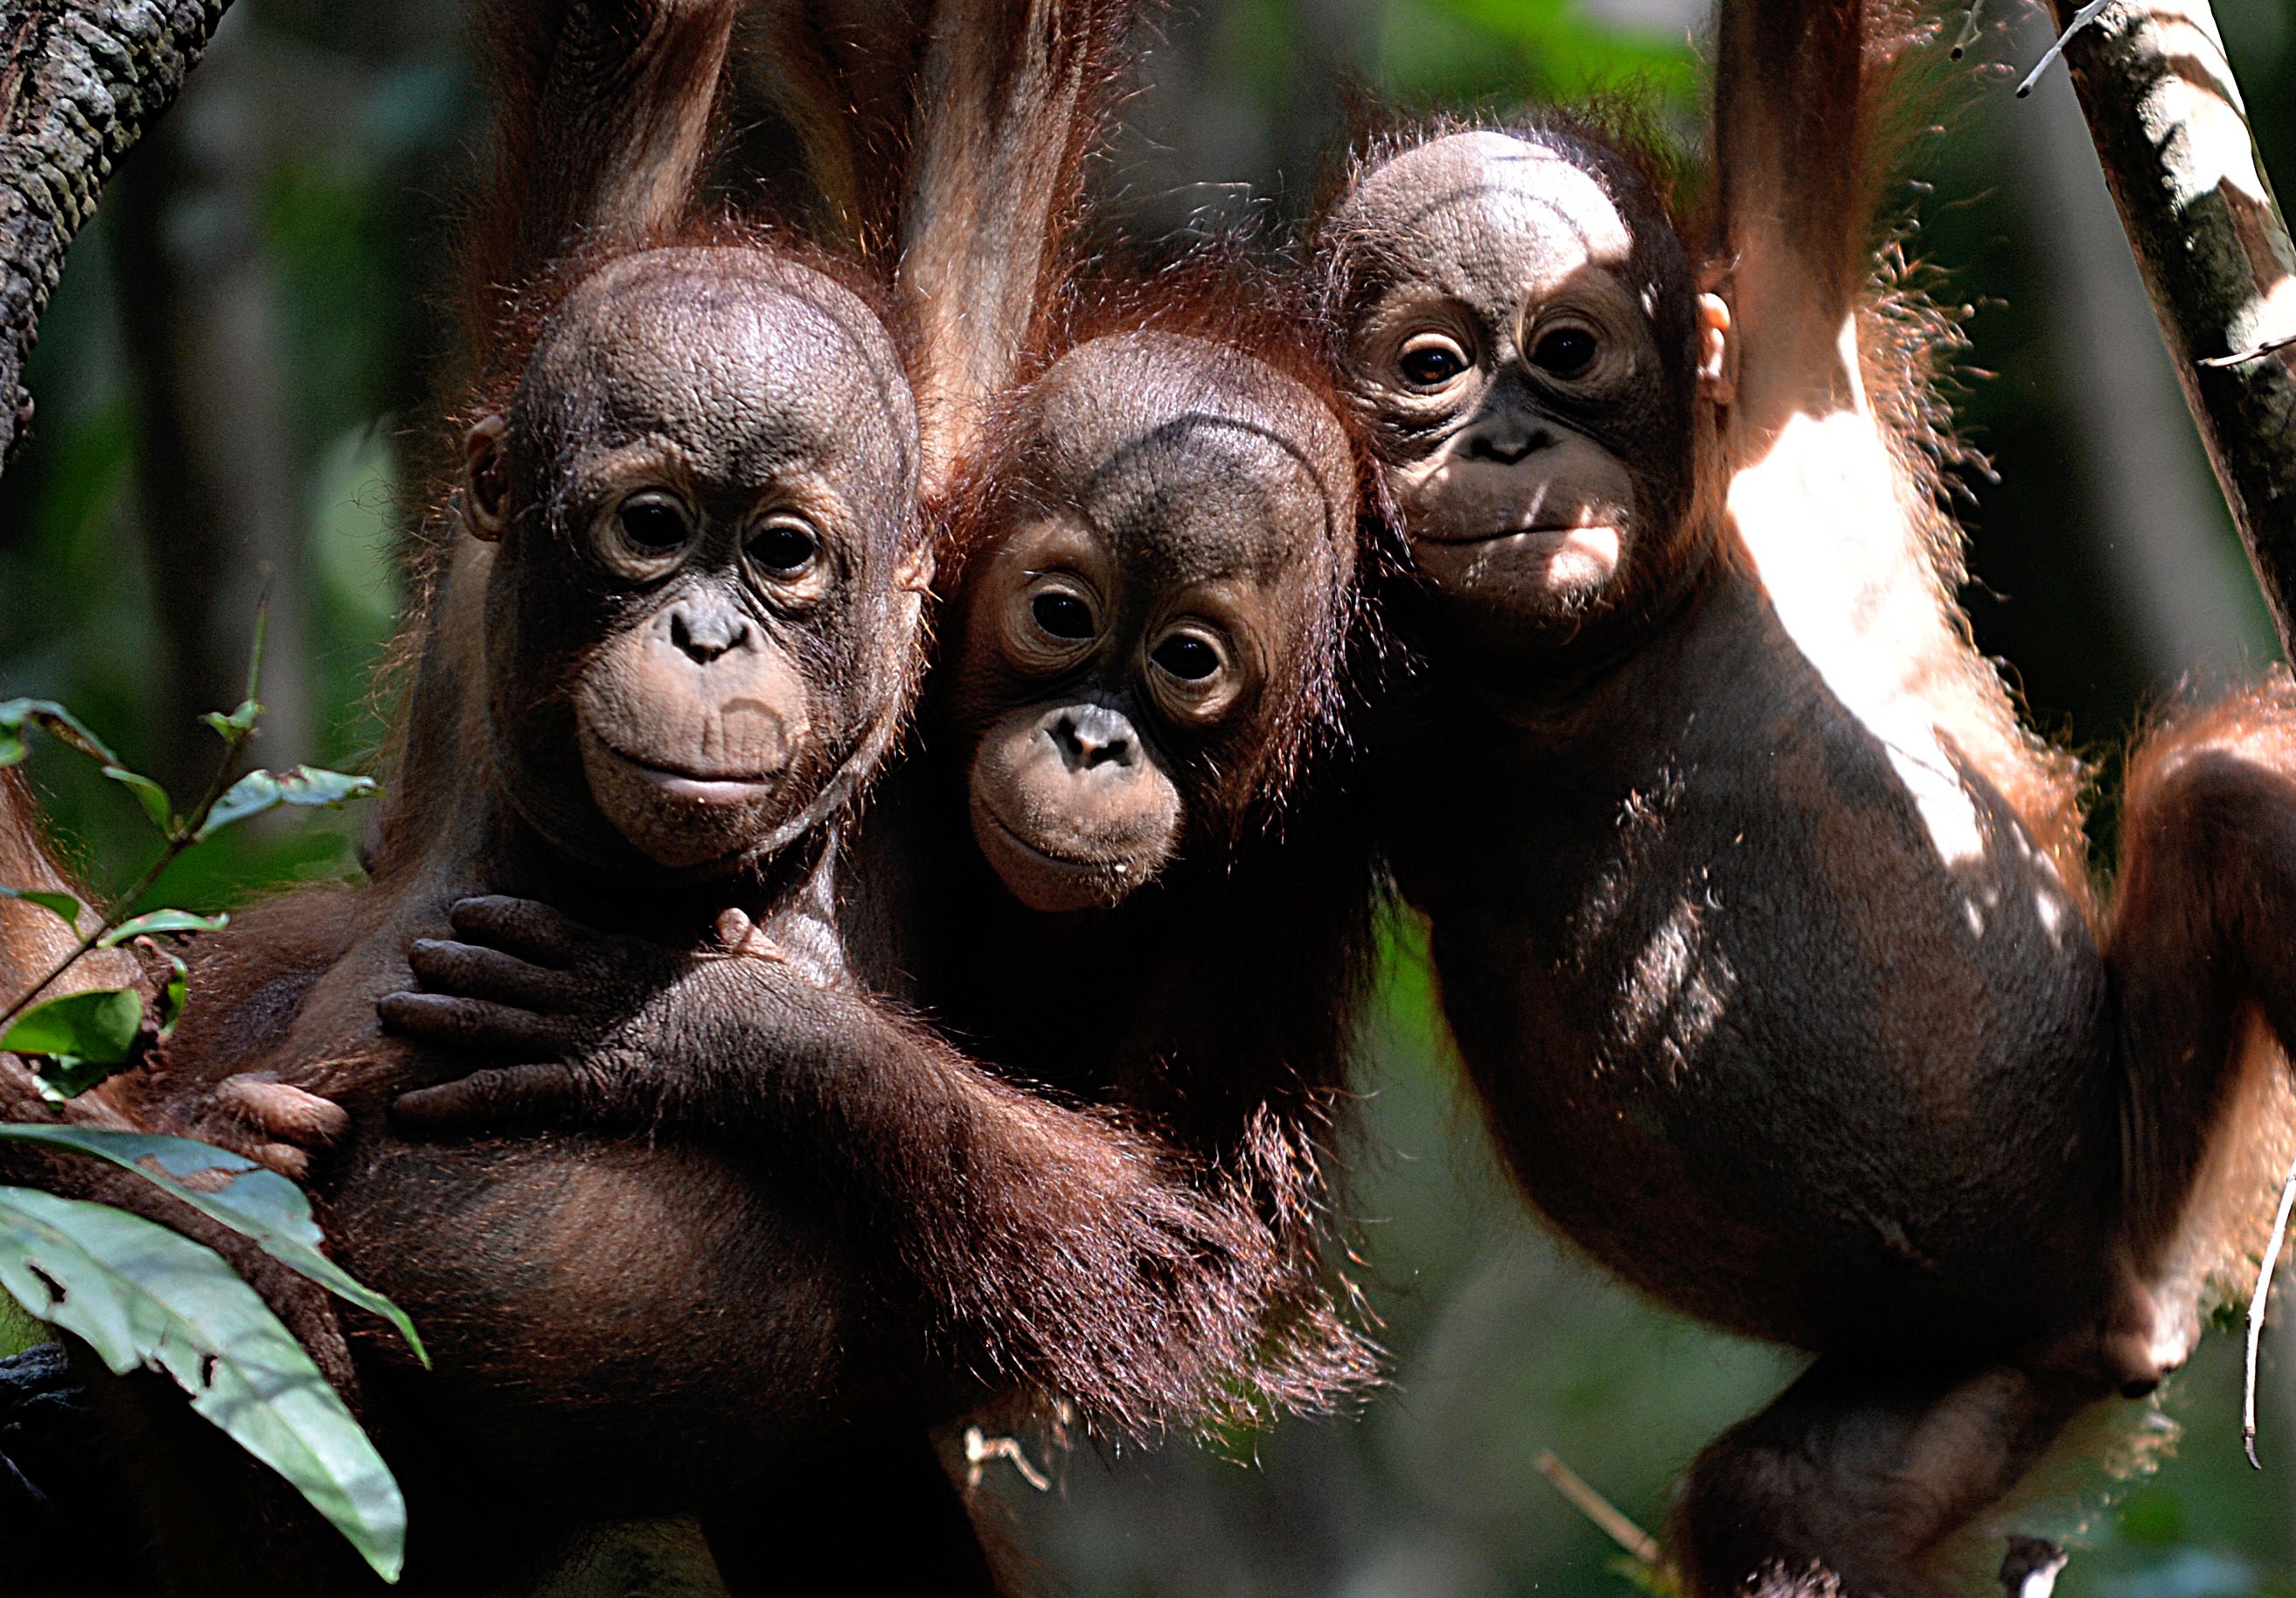 Borneo's orangutan population slashed by more than half in 16 years